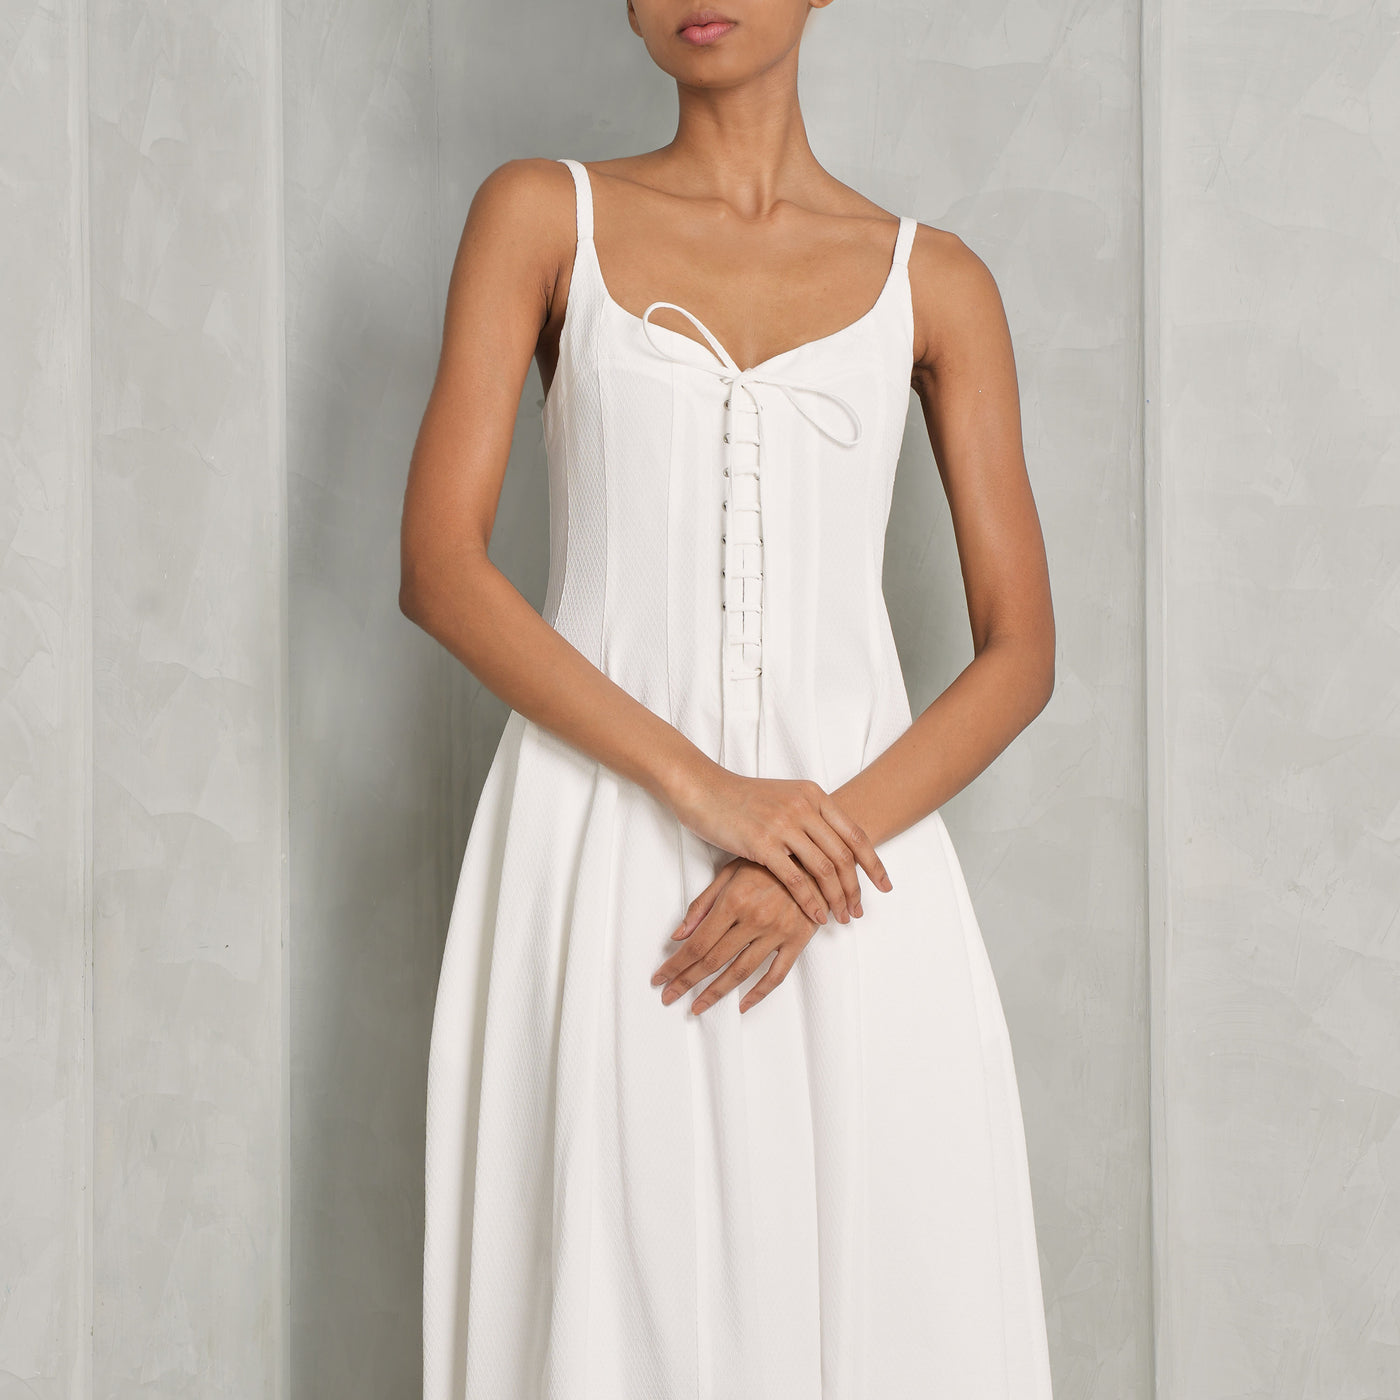 CHLOÉ white cotton sleeveless corseted lace up midi flared dress